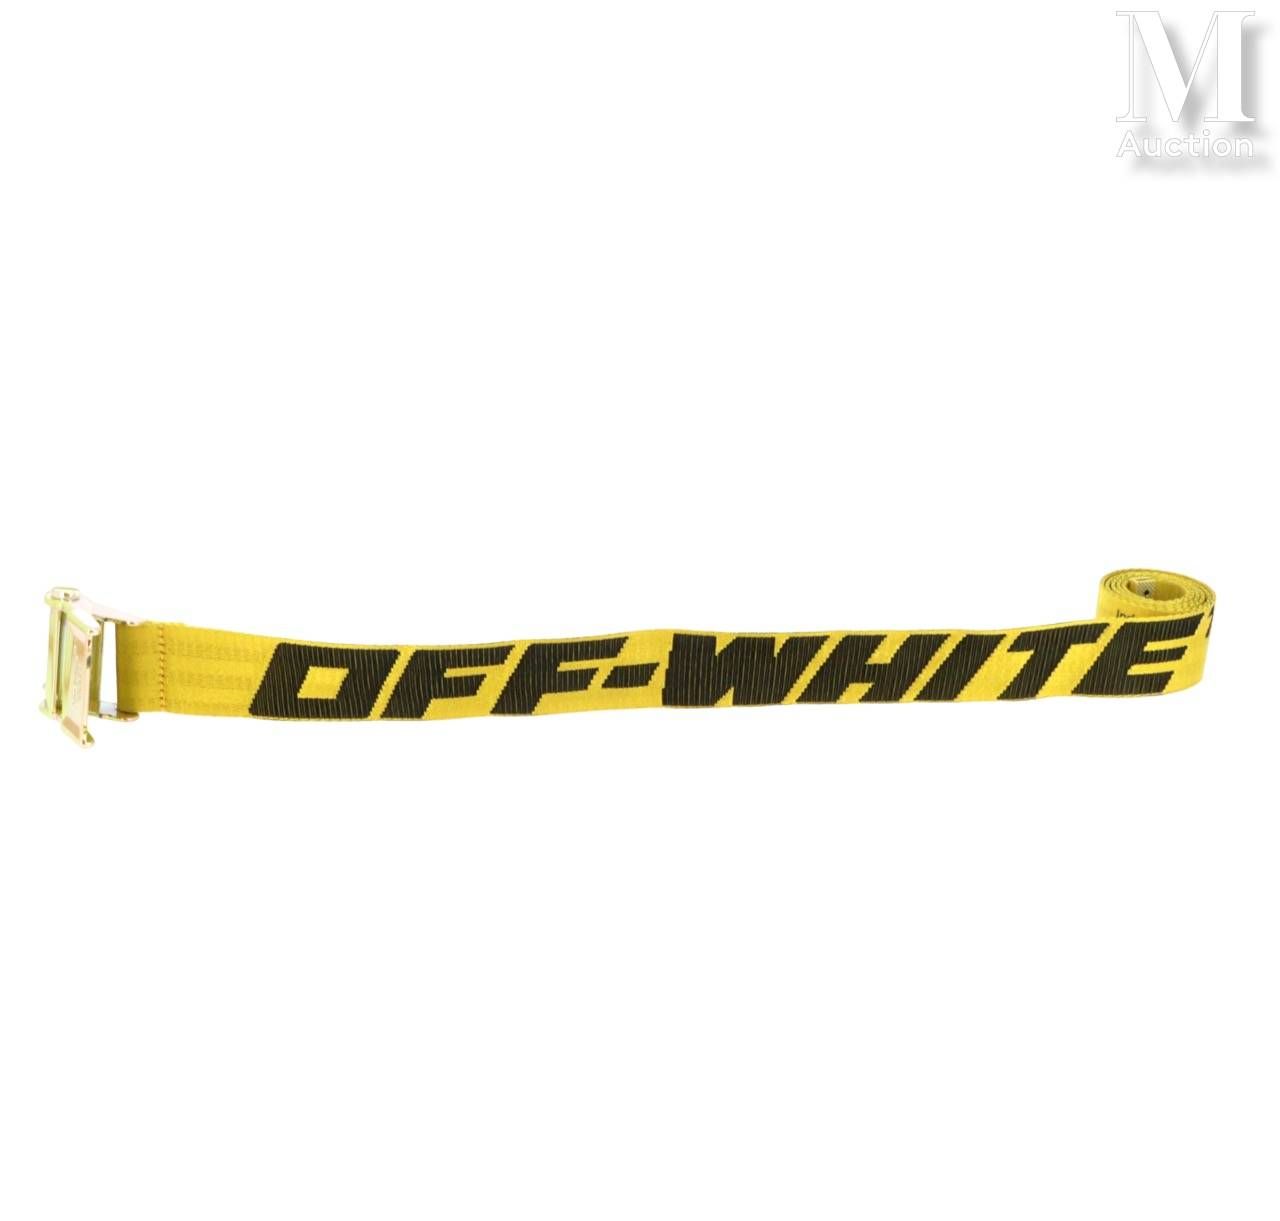 OFF WHITE INDUSTRIAL" BELT
in yellow and black industrial webbing, yellow metal &hellip;